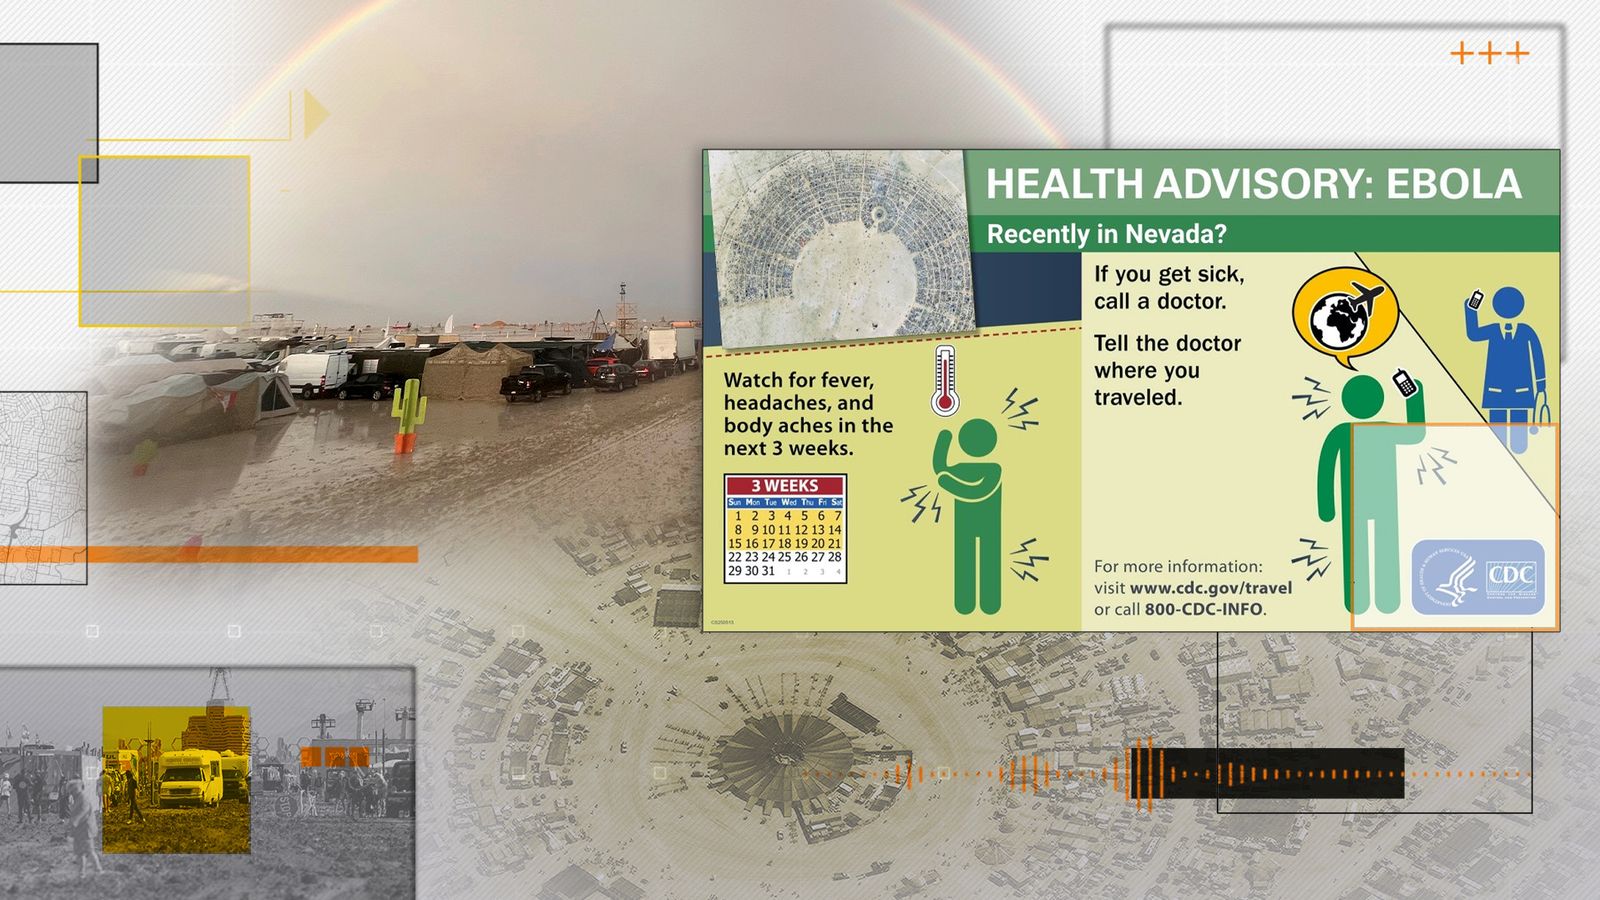 Rumours of Ebola outbreak at Burning Man Festival - here's why they're false